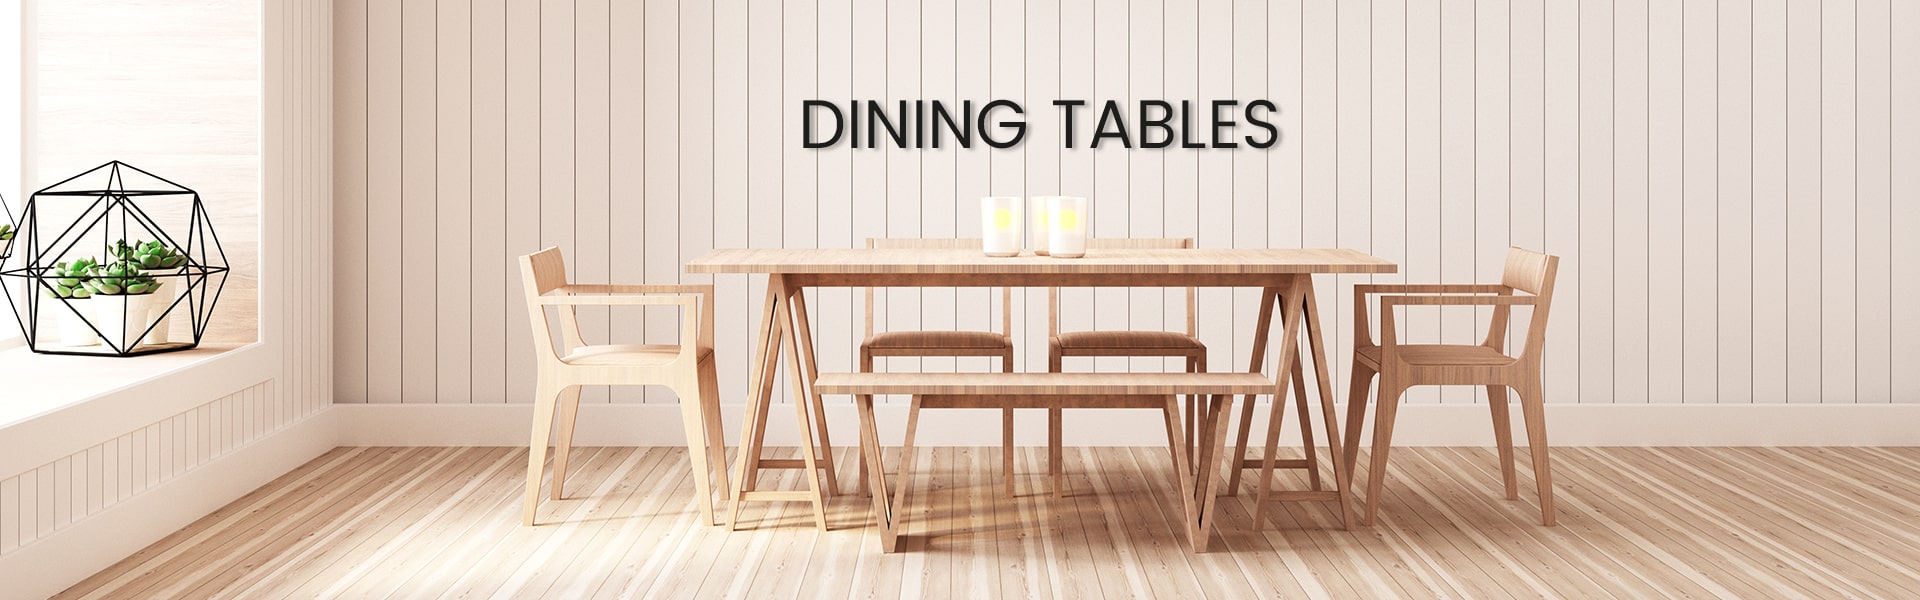 Dining Tables Set